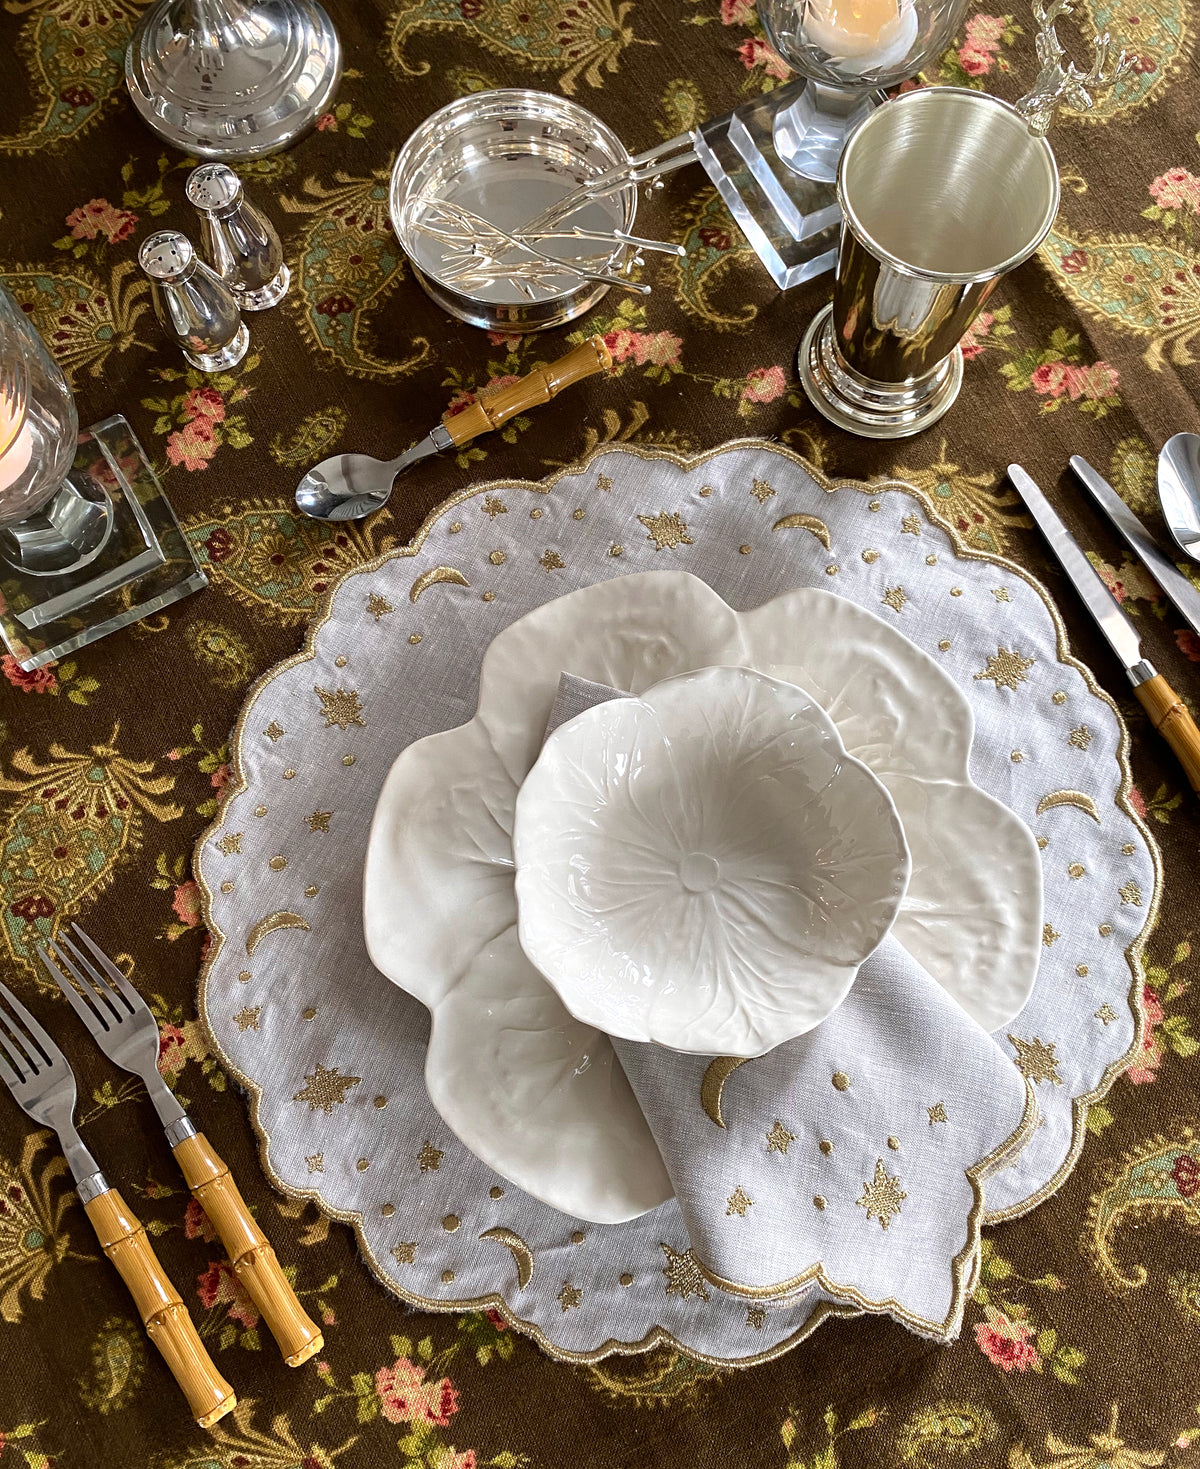 OTM Exclusive: The Astral Linen Napkin in White Linen and Gold Embroidery